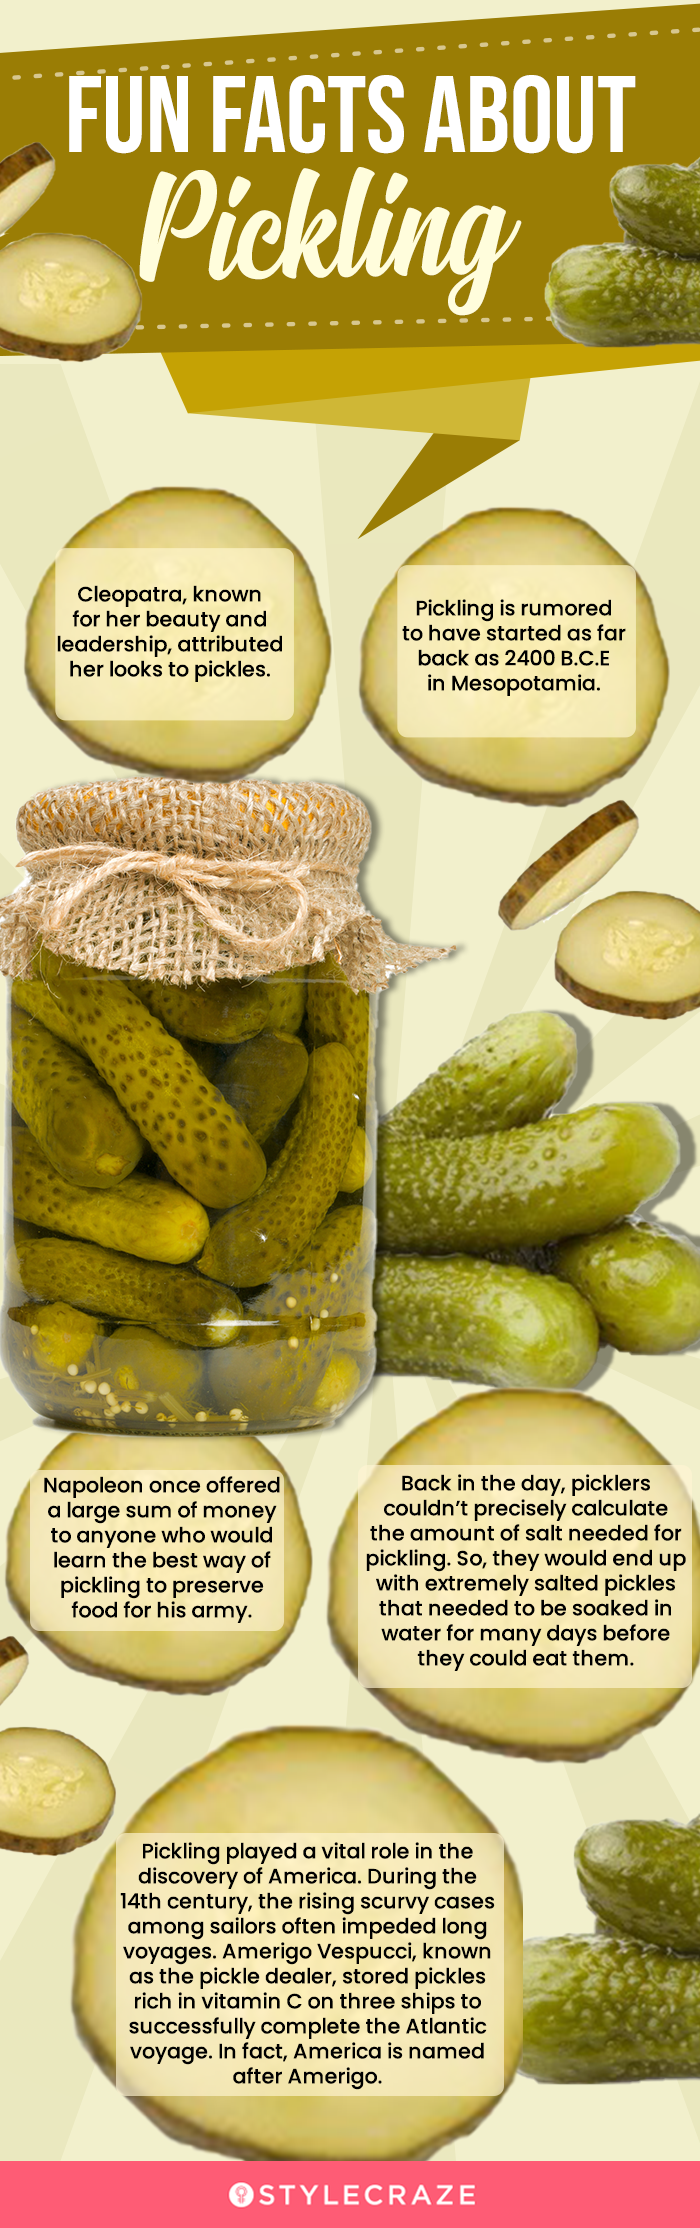 fun facts about pickling (infographic)